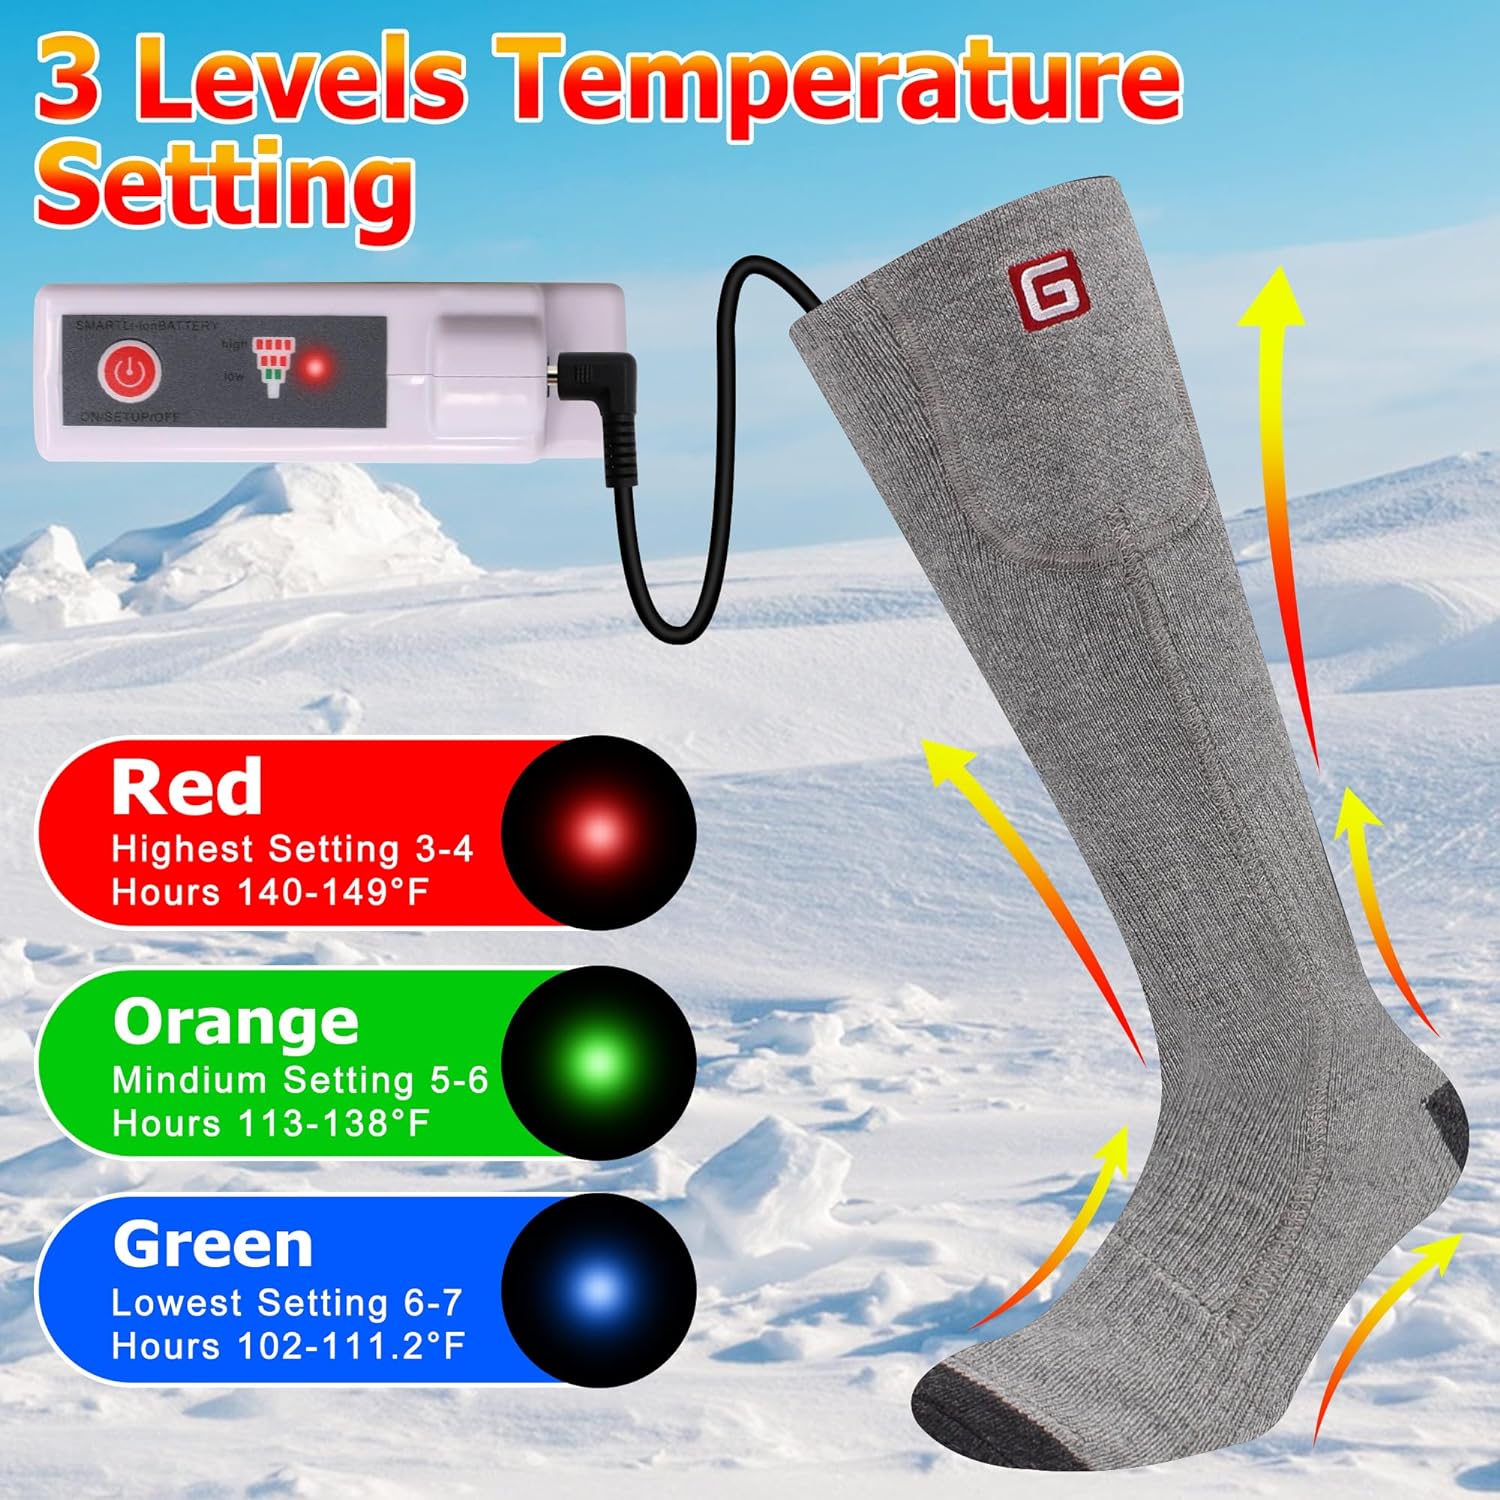 CODSOK Heated Socks for Men Rechargeable Electric 2200mAh Warm Socks，Winter Heating Socks Electric Cold Foot Washable Warmers for Motorcycle Cycling Camping Outdoor Hunting Skiing